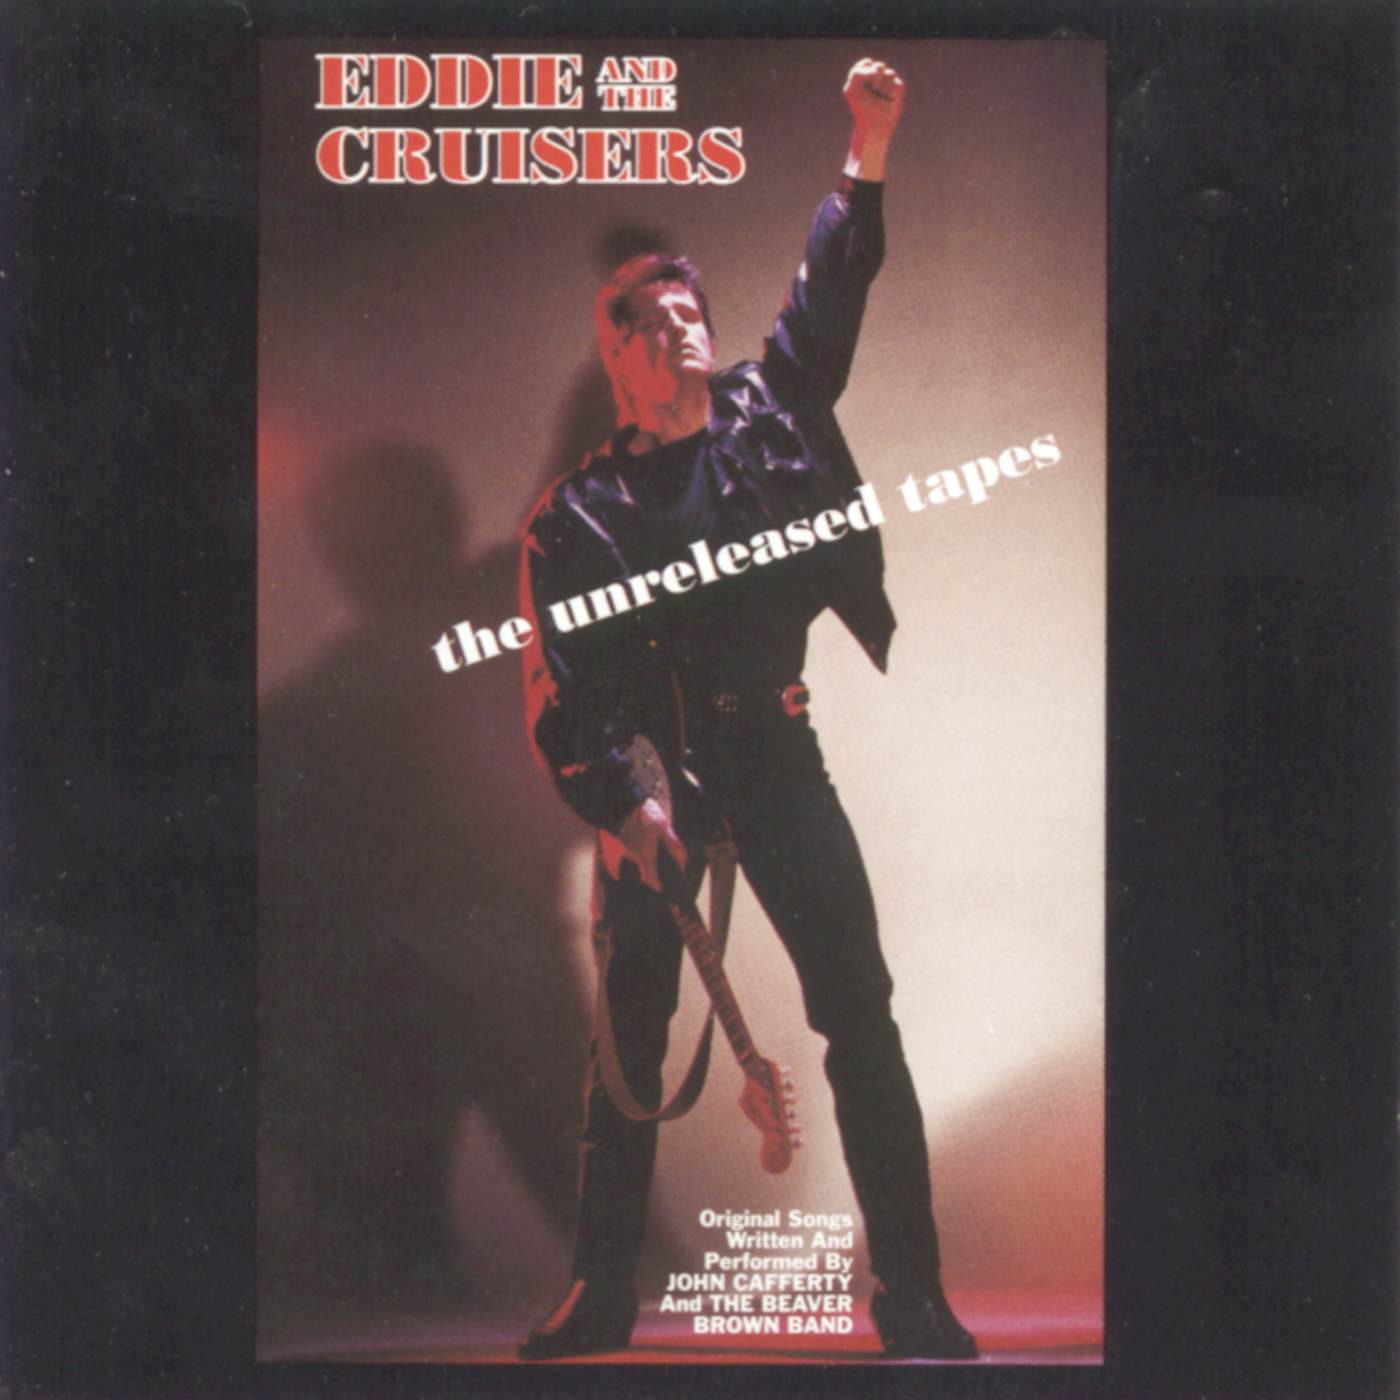 John Cafferty & the Beaver Brown Band EDDIE & THE CRUISERS: THE UNRELEASED TAPES CD